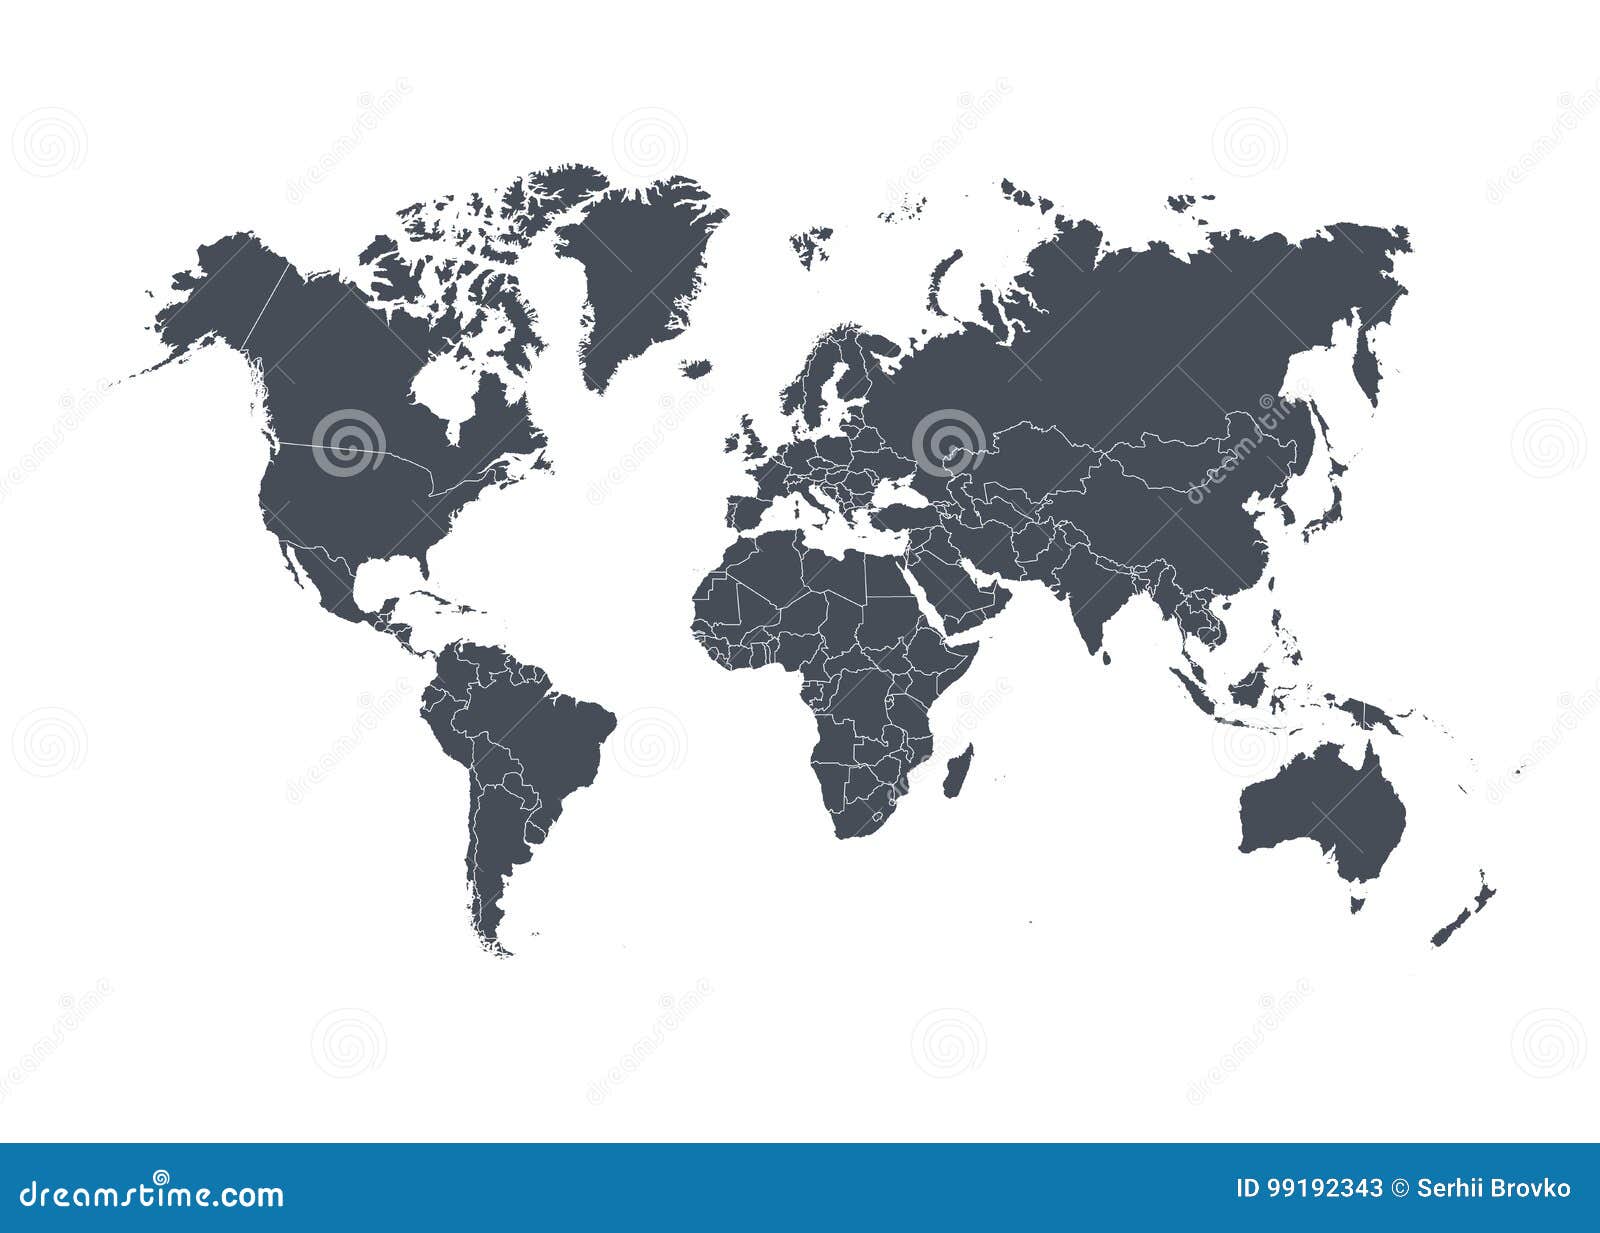 world map with countries  on white background.  .